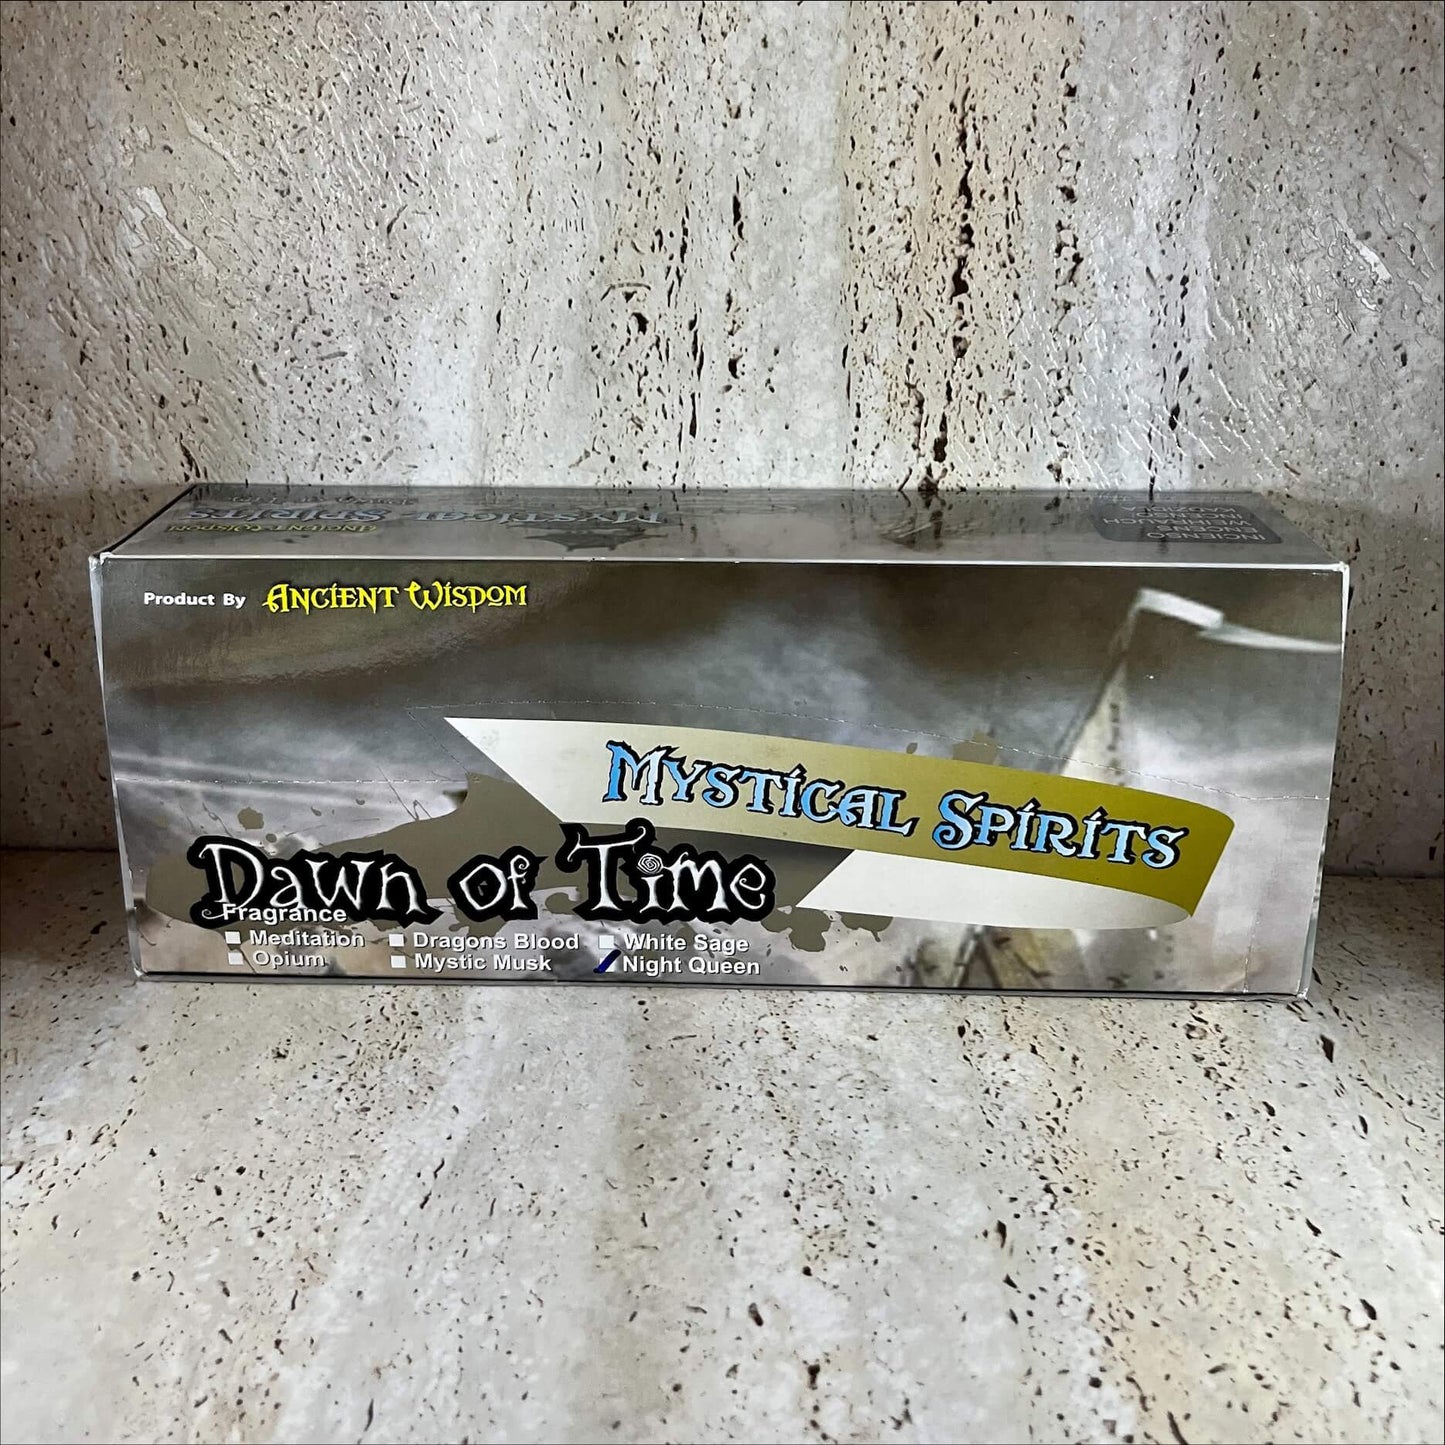 Dawn of Time Night Queen incense